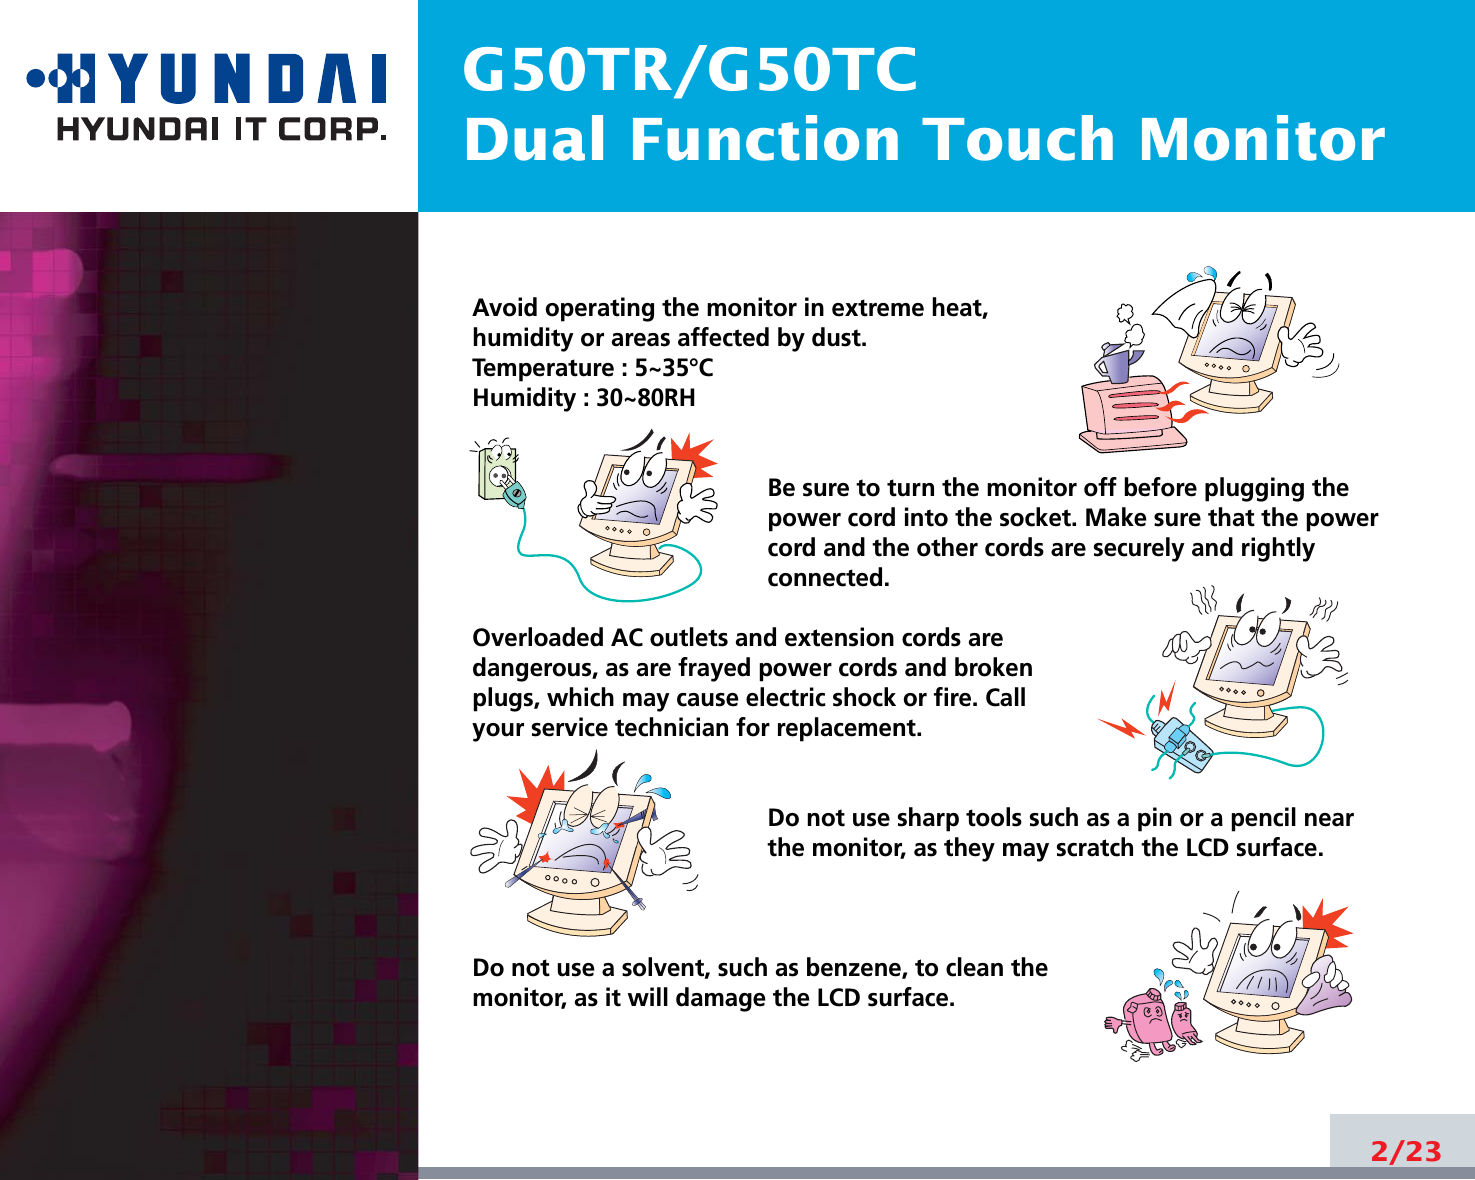 G50TR/G50TCDual Function Touch Monitor2/23Avoid operating the monitor in extreme heat, humidity or areas affected by dust. Temperature : 5~35°CHumidity : 30~80RH Be sure to turn the monitor off before plugging thepower cord into the socket. Make sure that the powercord and the other cords are securely and rightlyconnected.Overloaded AC outlets and extension cords are dangerous, as are frayed power cords and broken plugs, which may cause electric shock or fire. Call your service technician for replacement.Do not use sharp tools such as a pin or a pencil near the monitor, as they may scratch the LCD surface.Do not use a solvent, such as benzene, to clean the monitor, as it will damage the LCD surface.